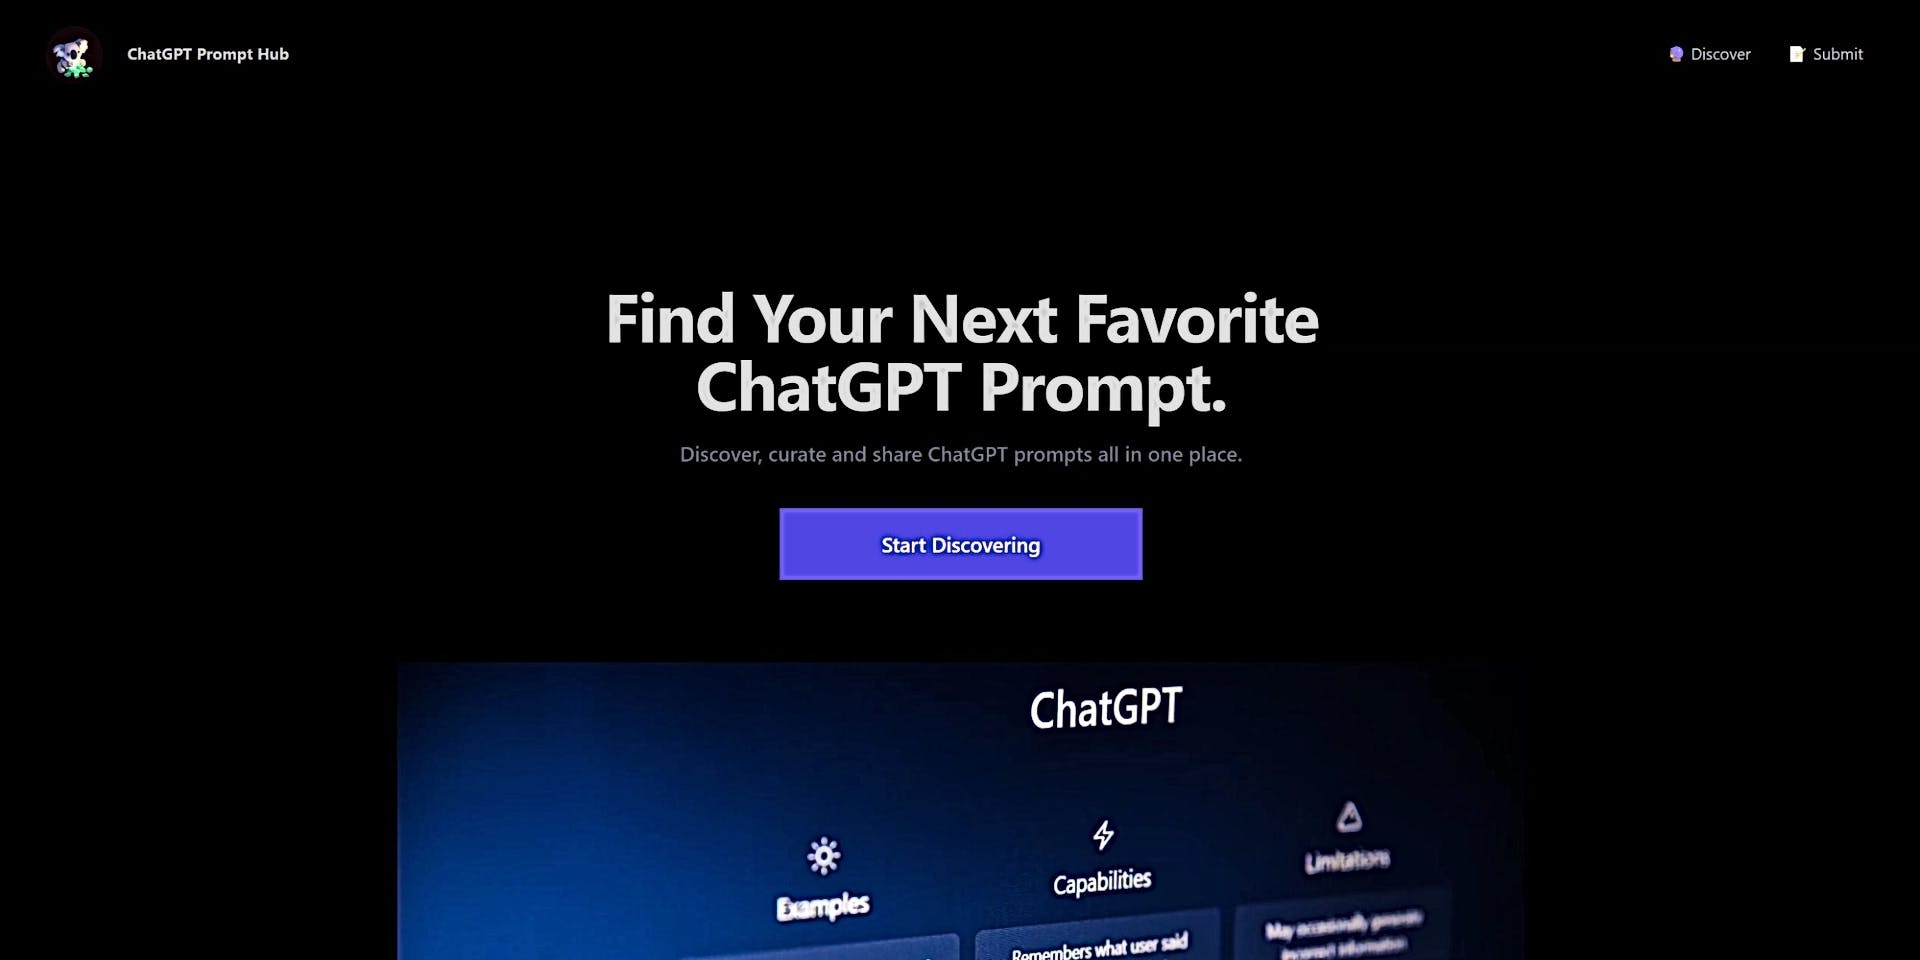 Chat GPT Prompt Hub featured